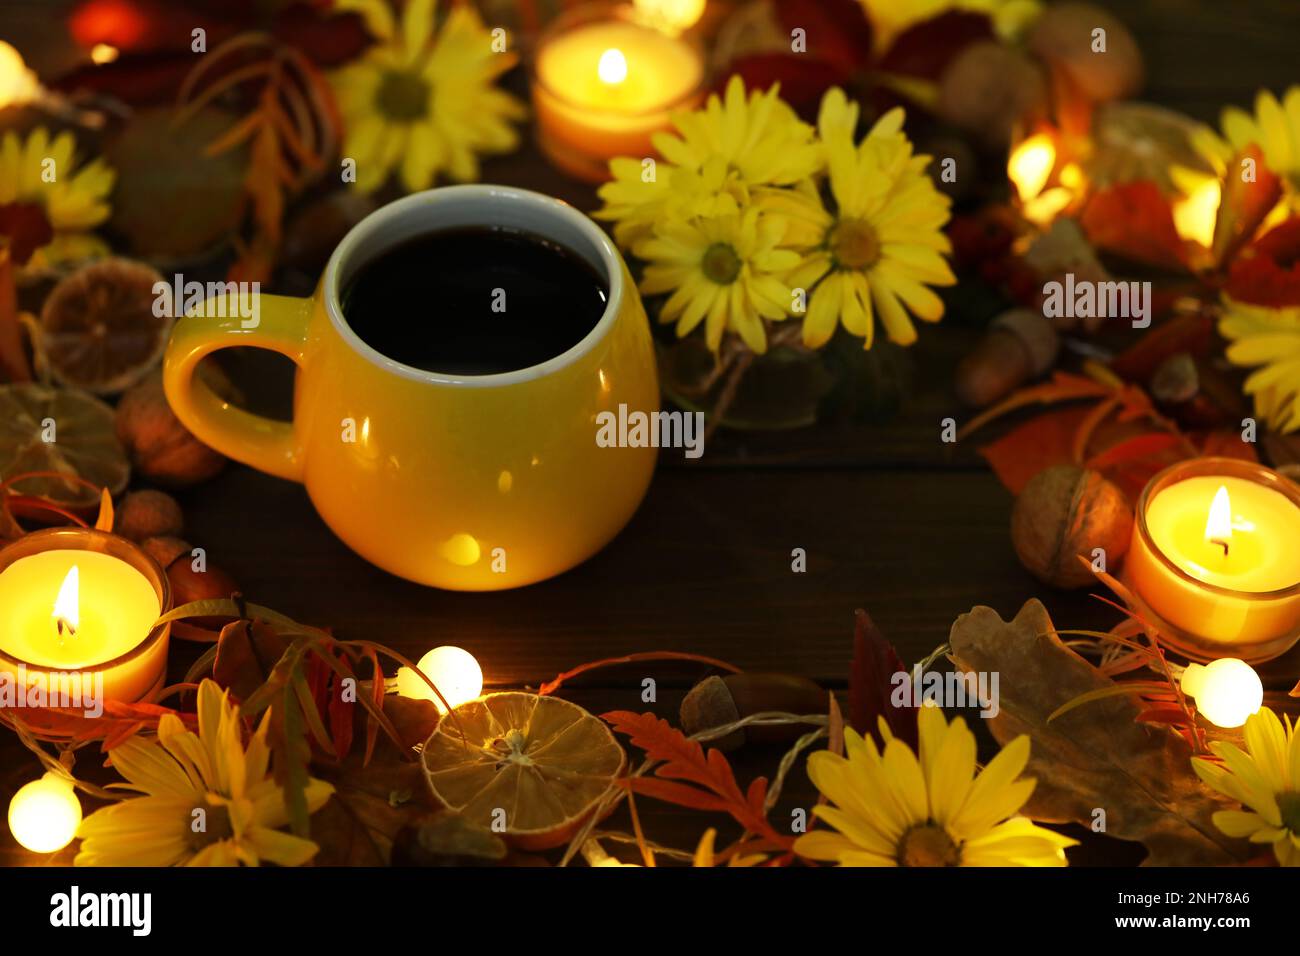 cup of coffee on the autumn background with leaves and flowers Stock Photo